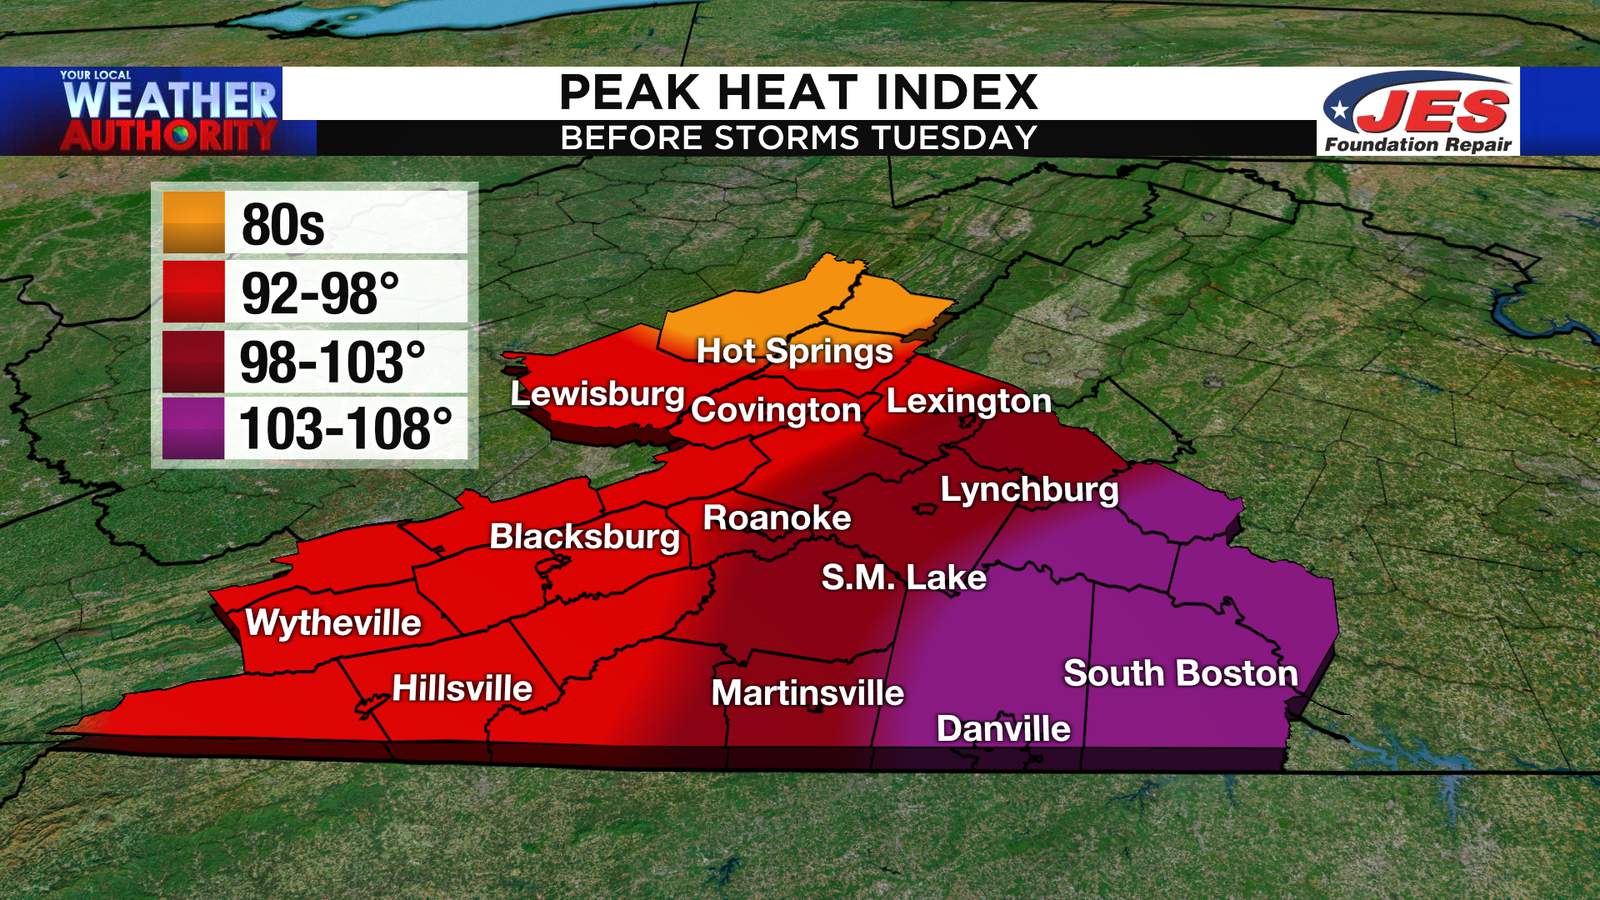 Dangerous heat develops for parts of the area prior to scattered storms